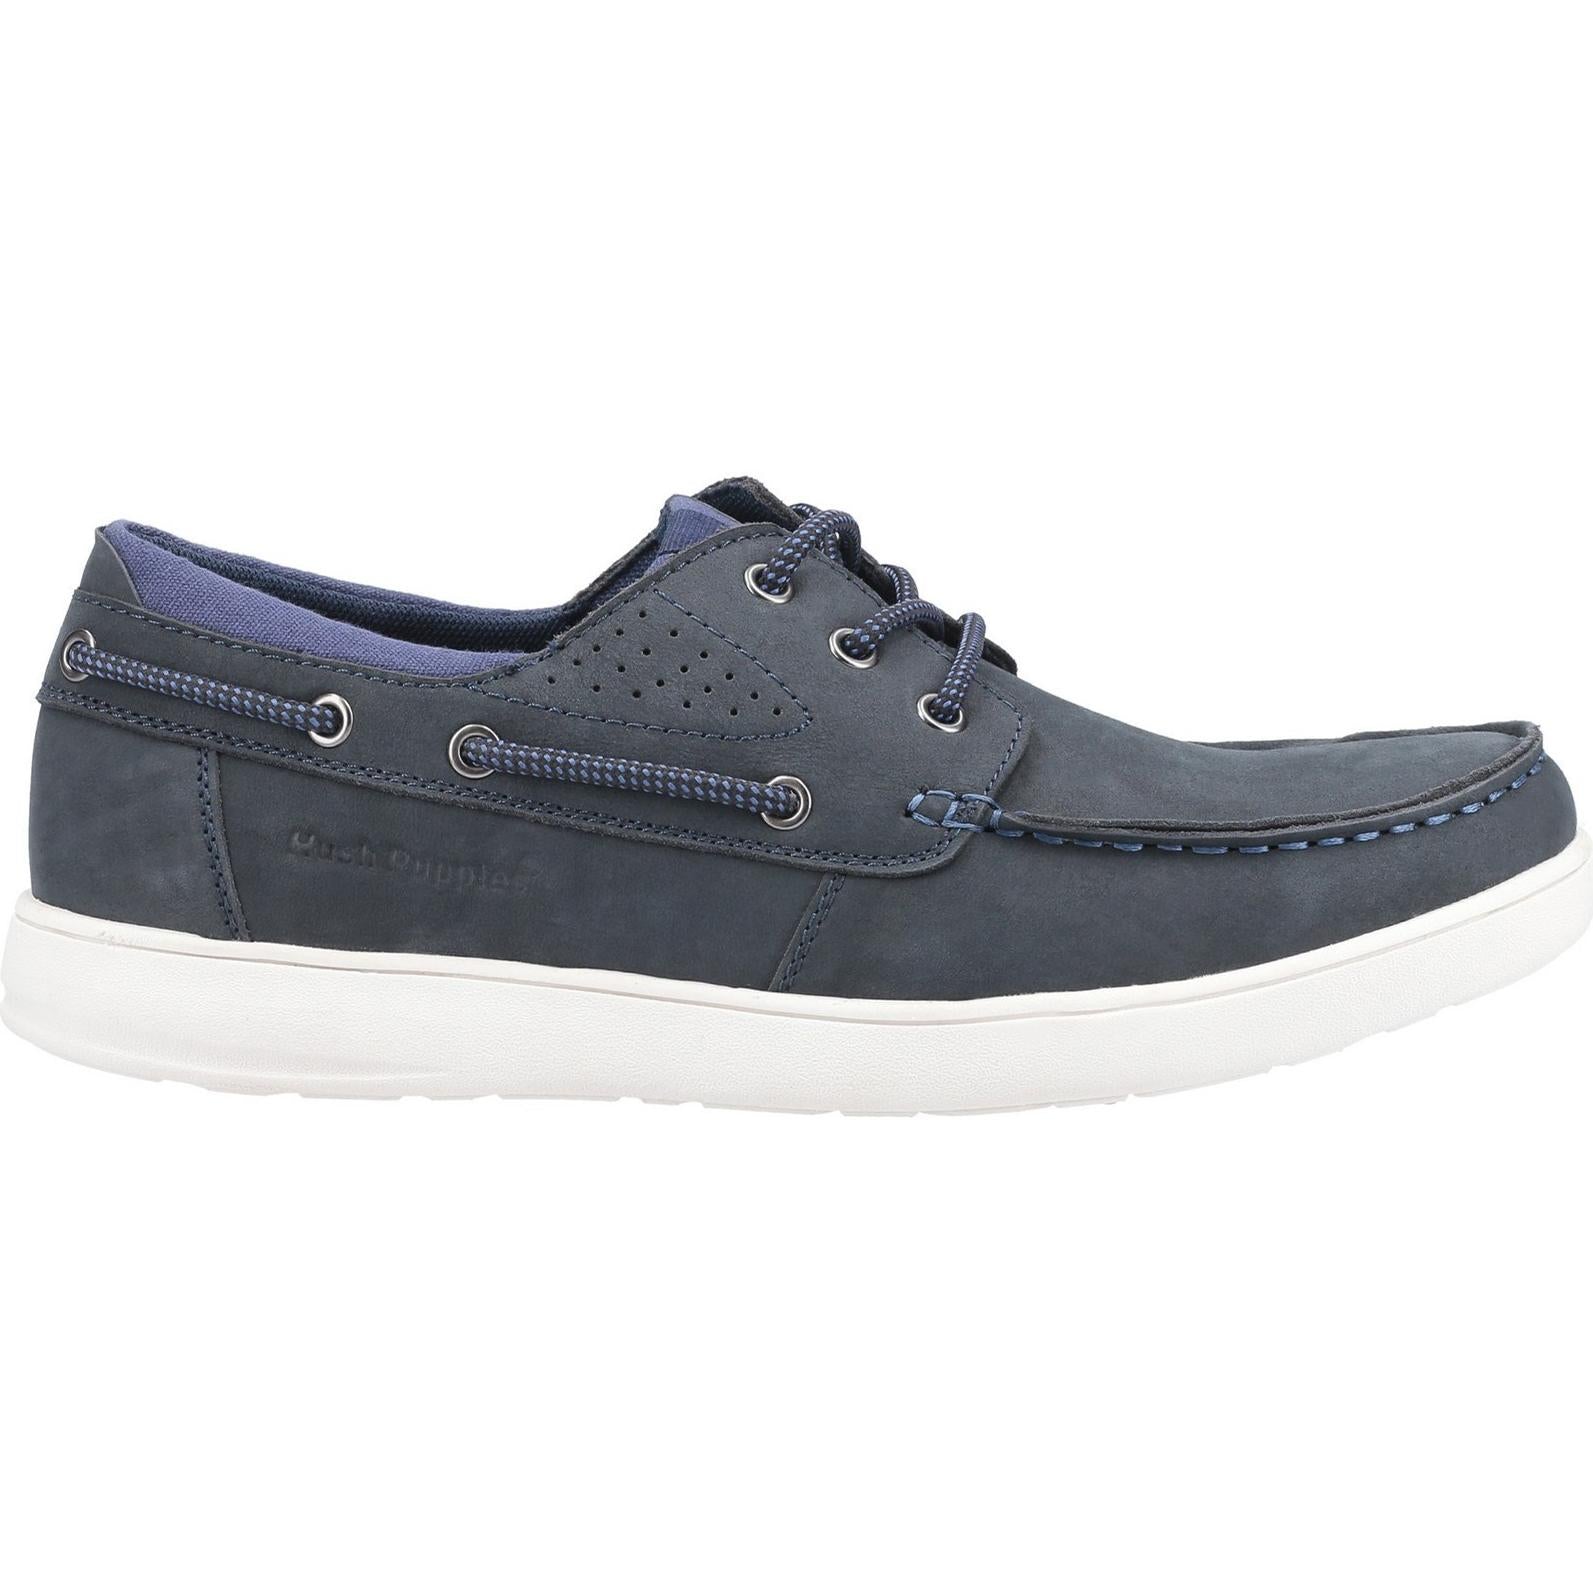 Hush Puppies Liam Lace Up Boat Shoe